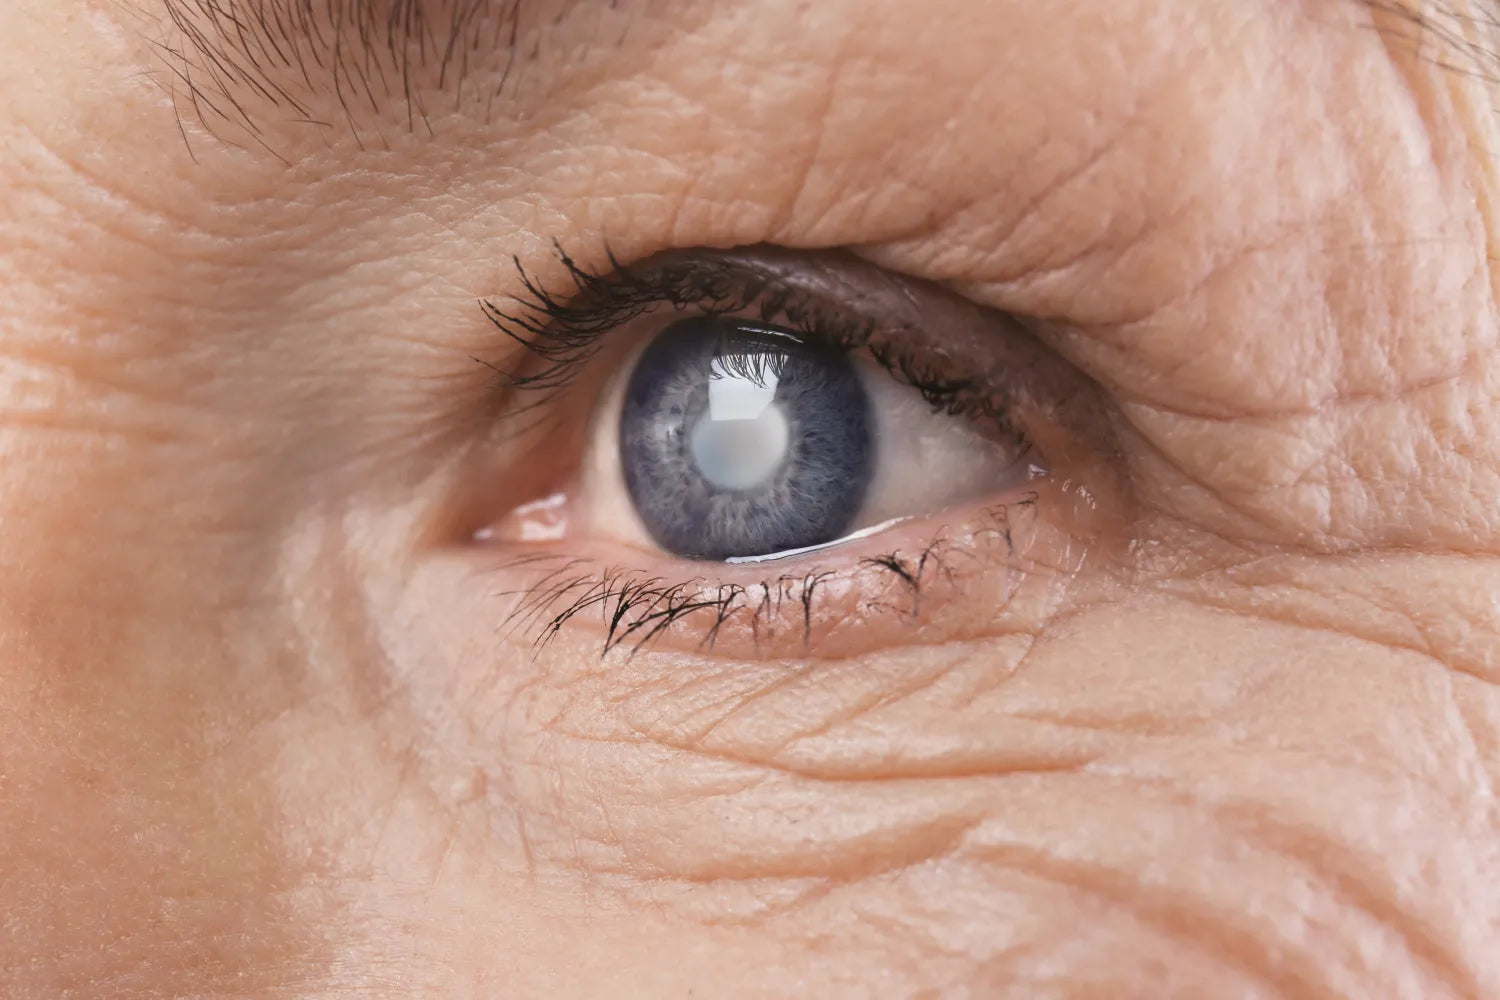 What Does Glaucoma Look Like?